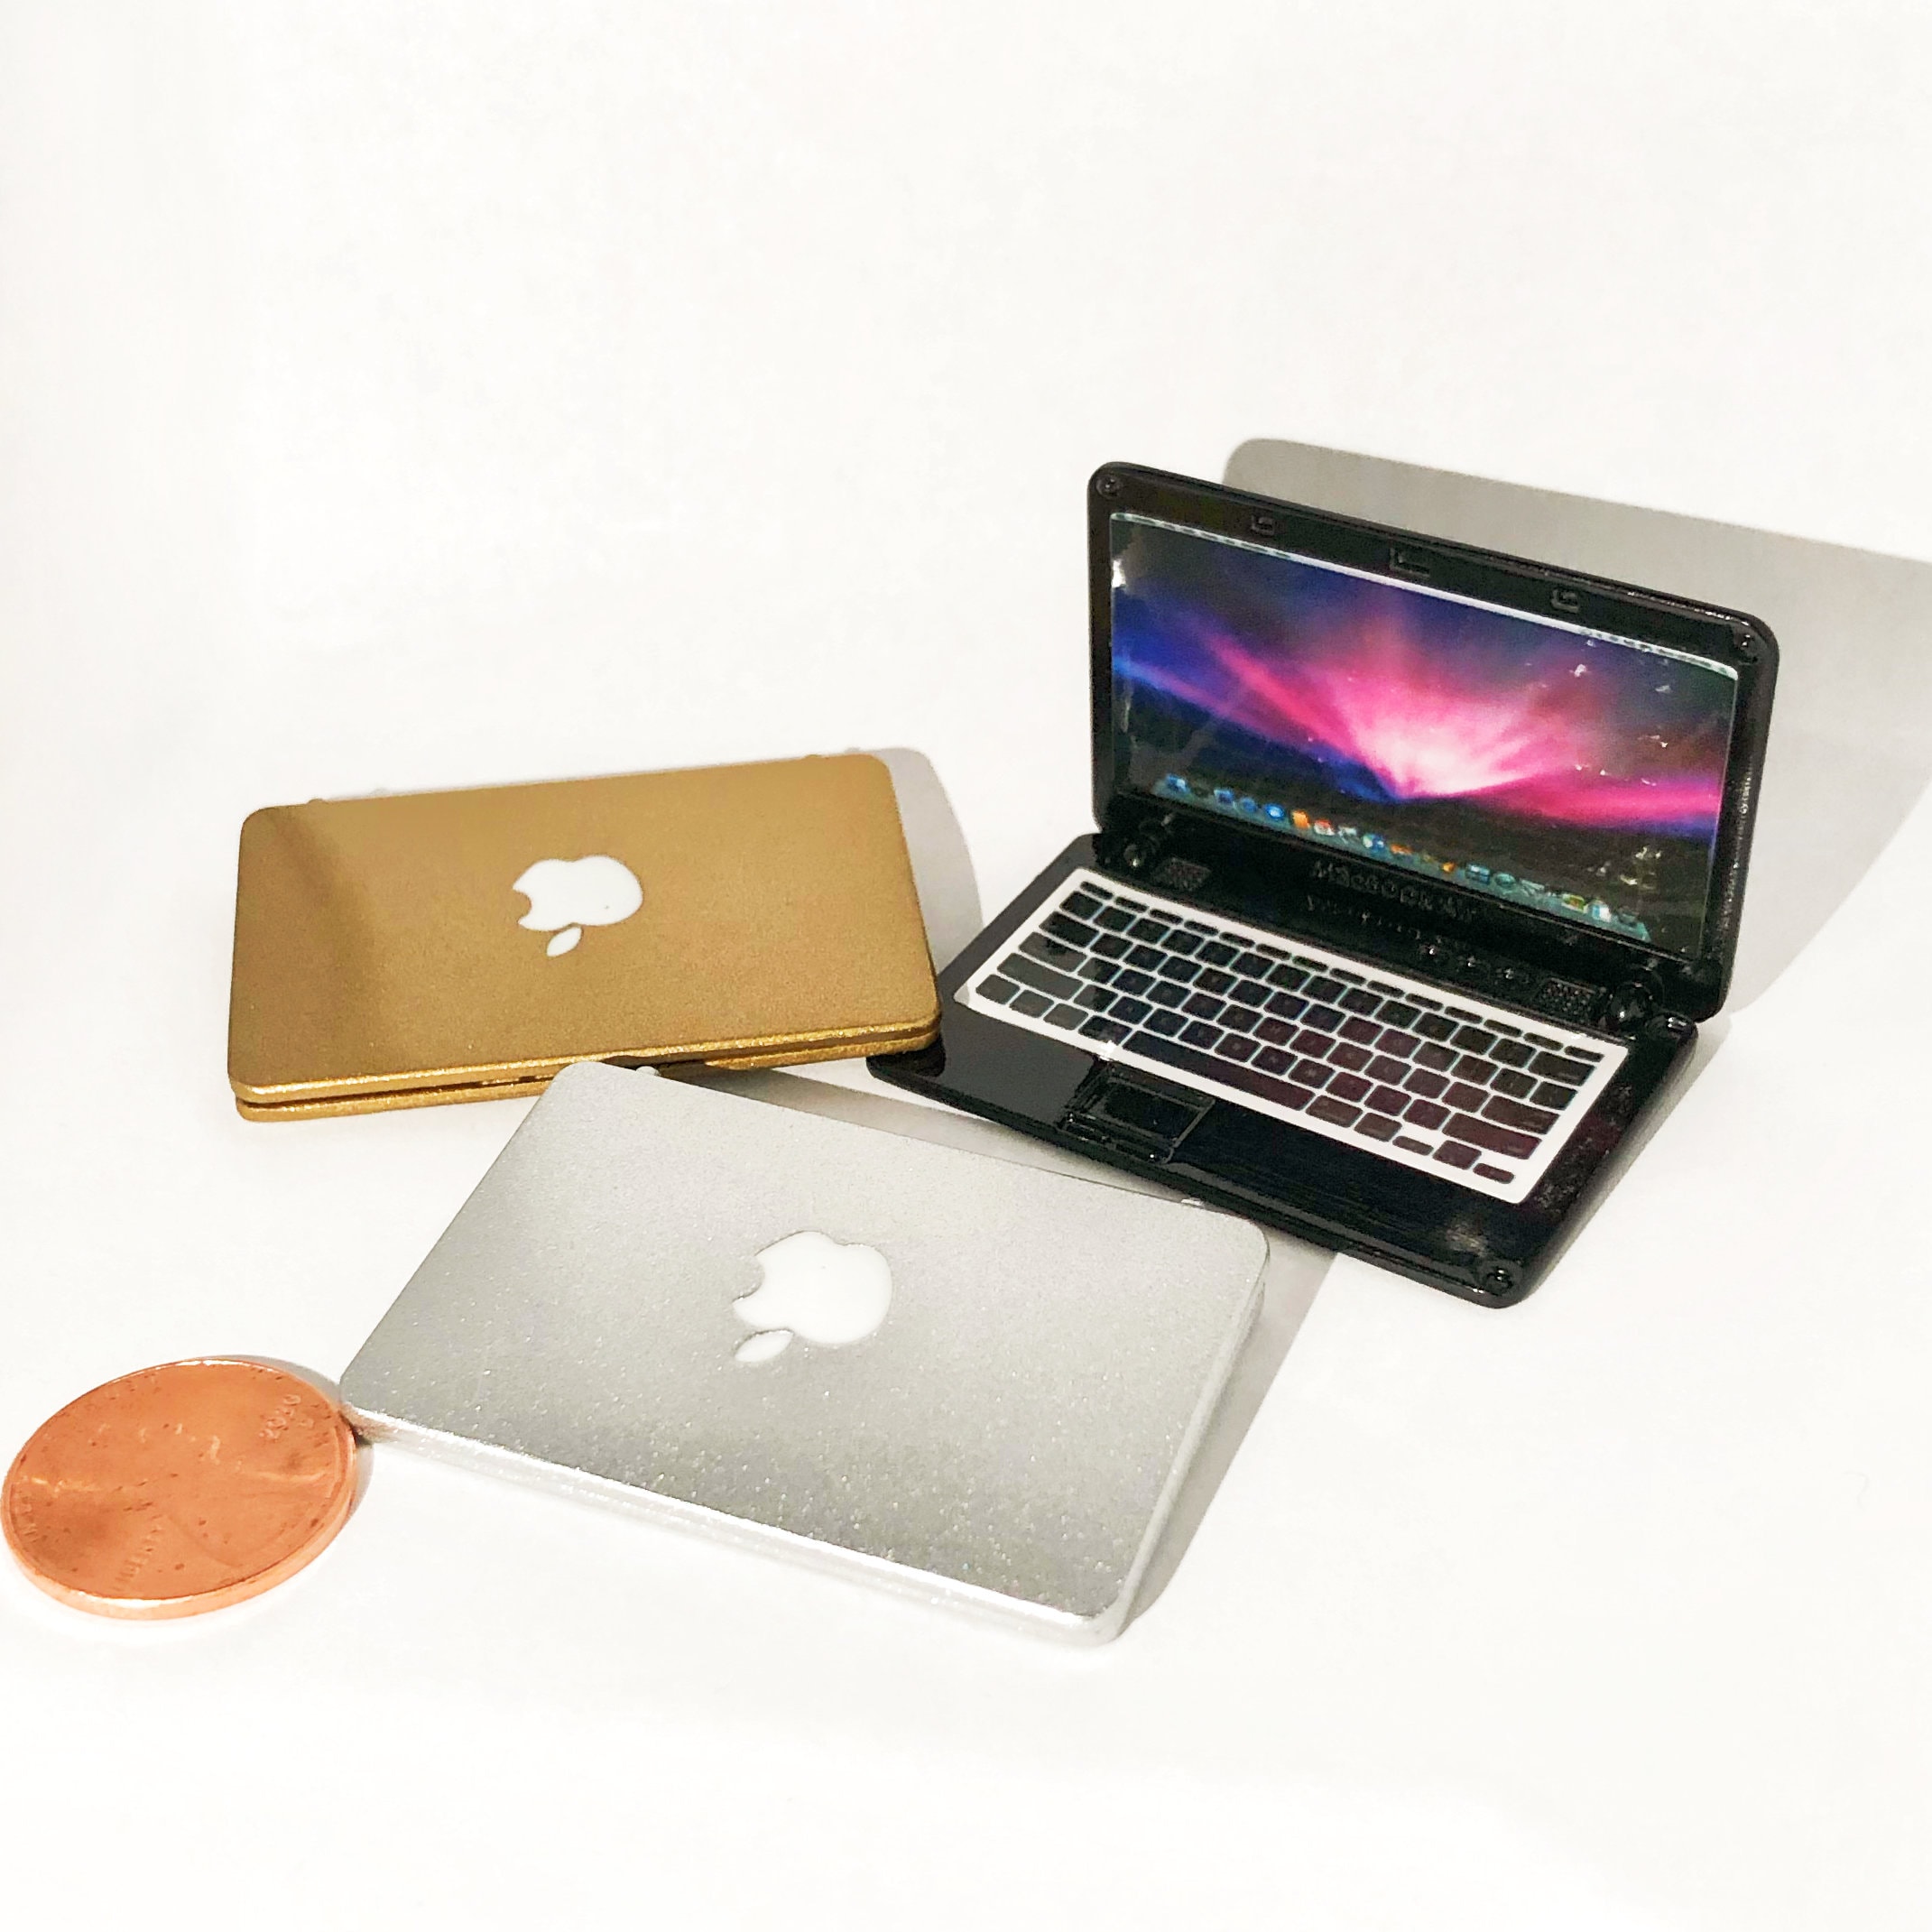 New McBook Pro (Notebook, Laptop) Scale 1/6